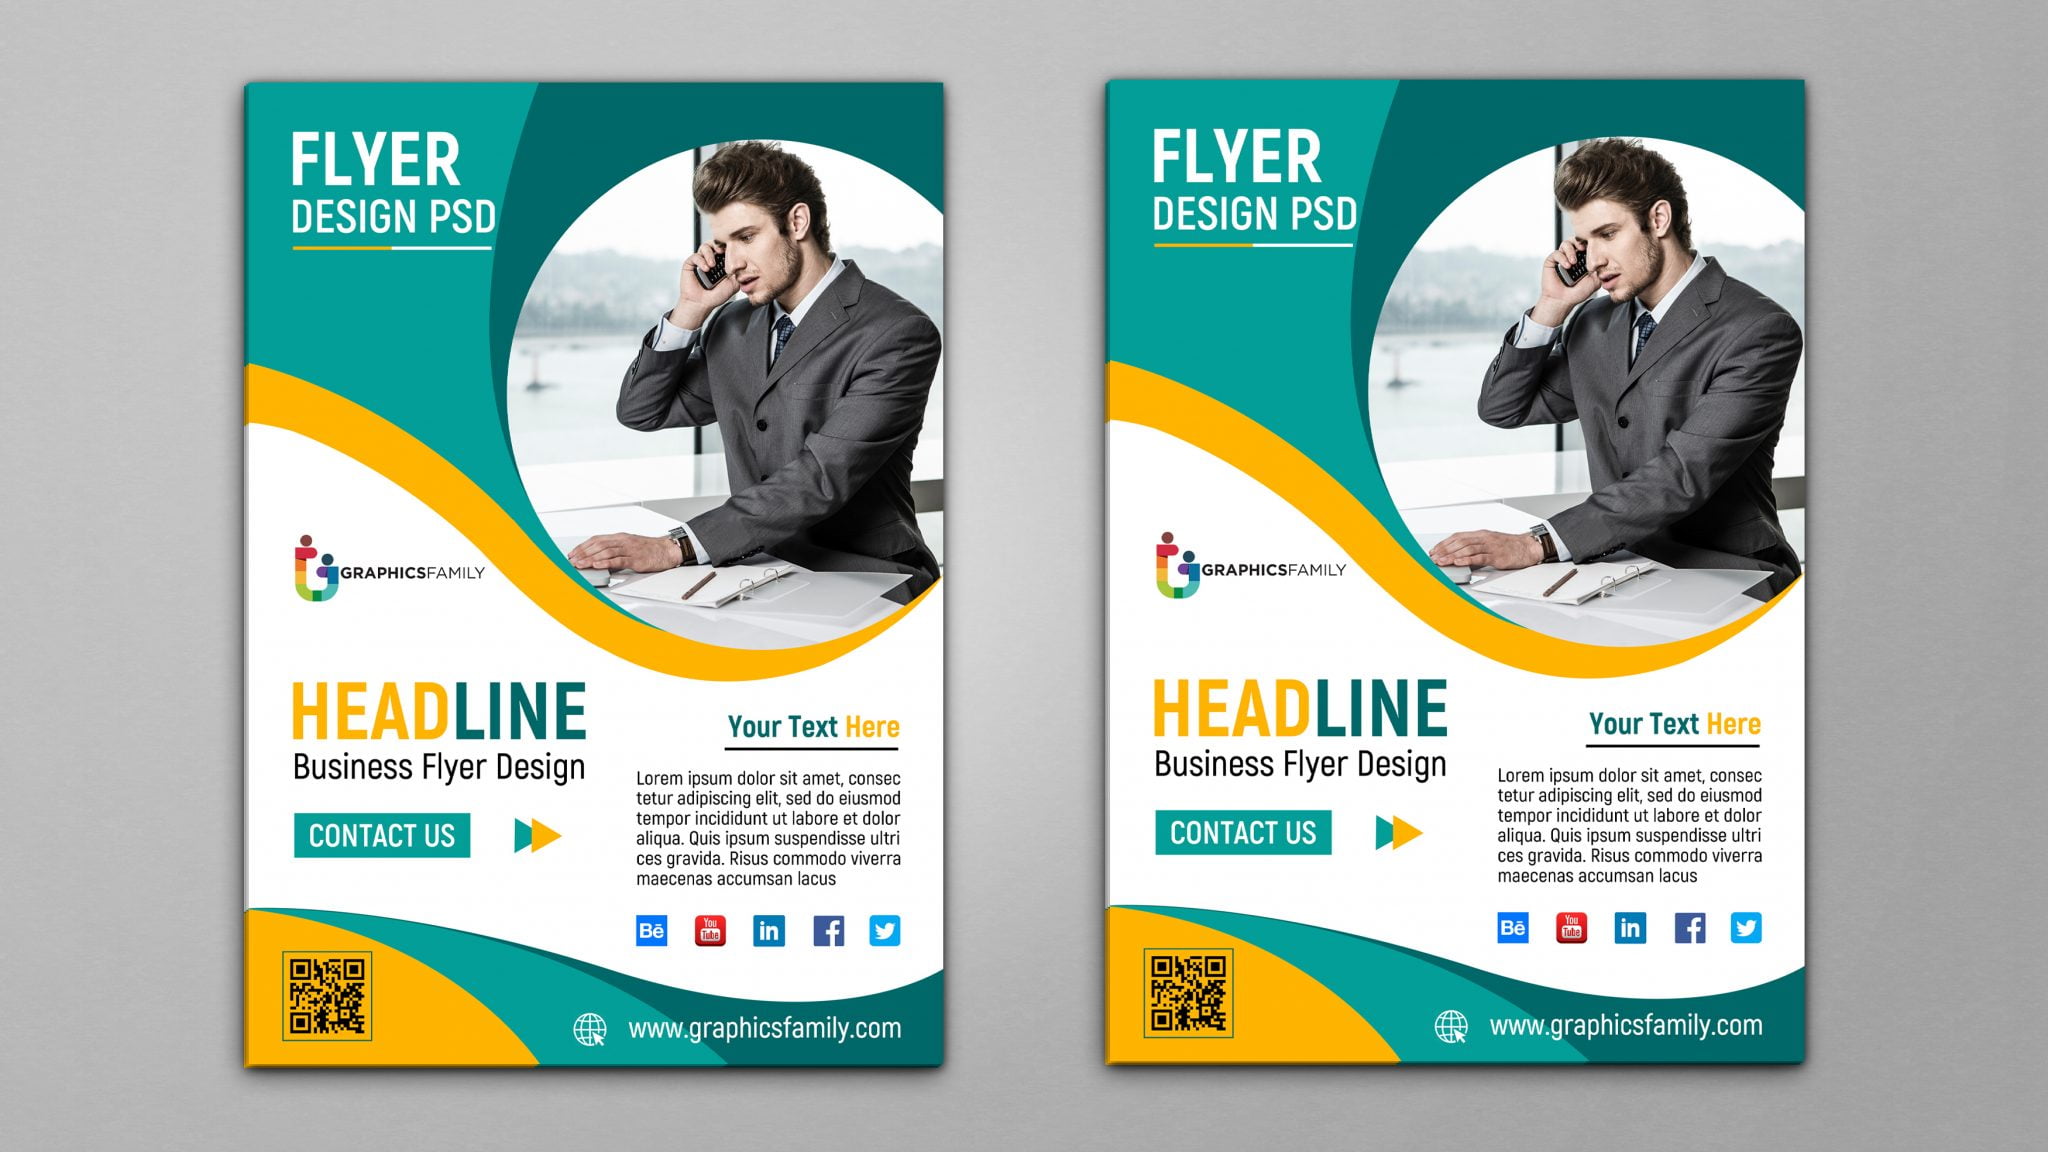 Sample Flyers For Business